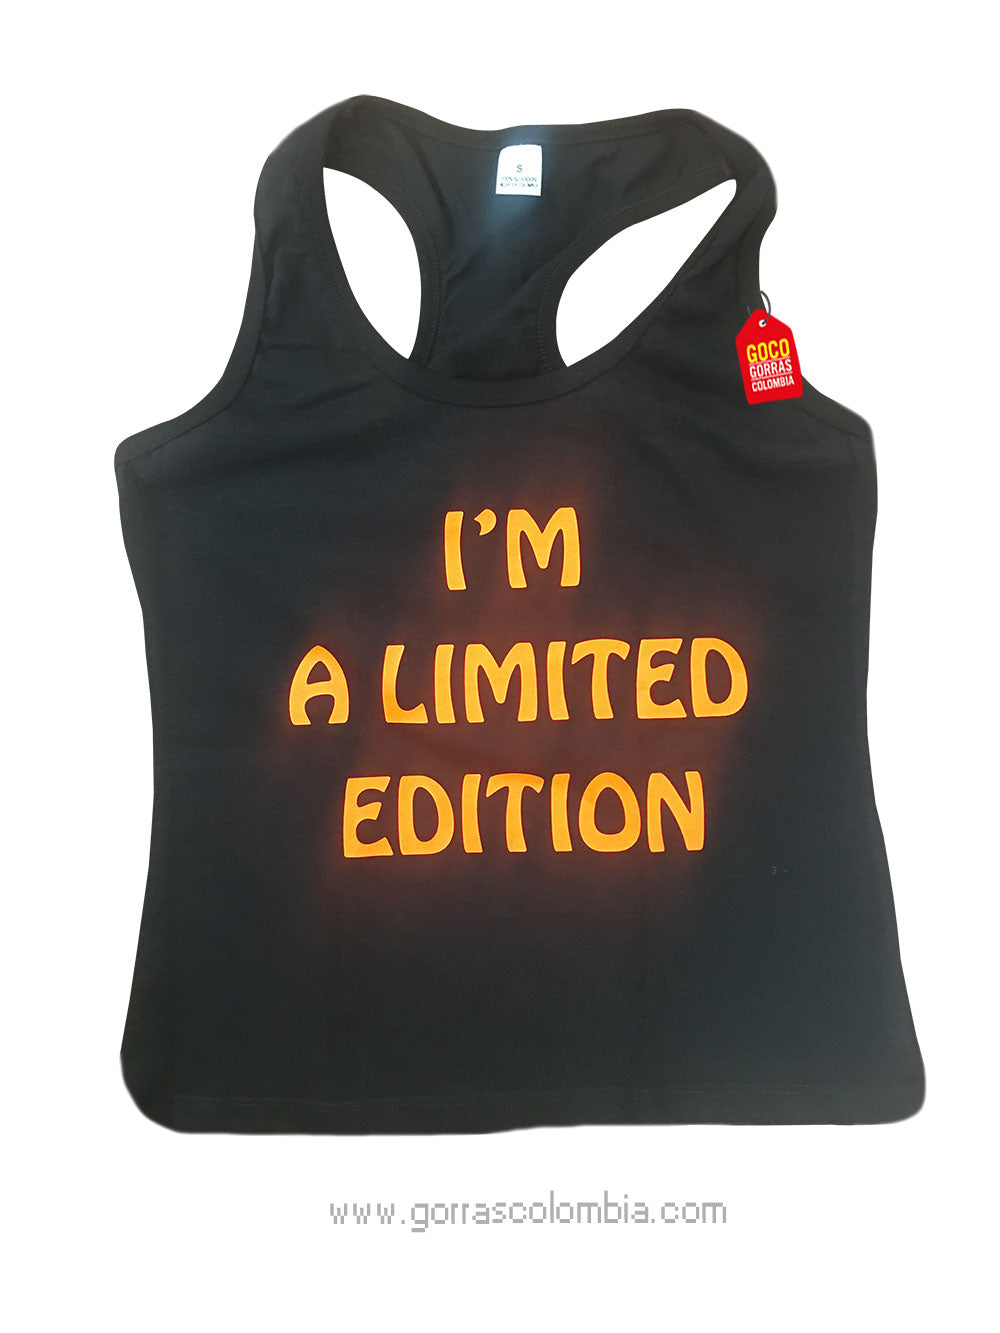 I'M A LIMITED EDITION